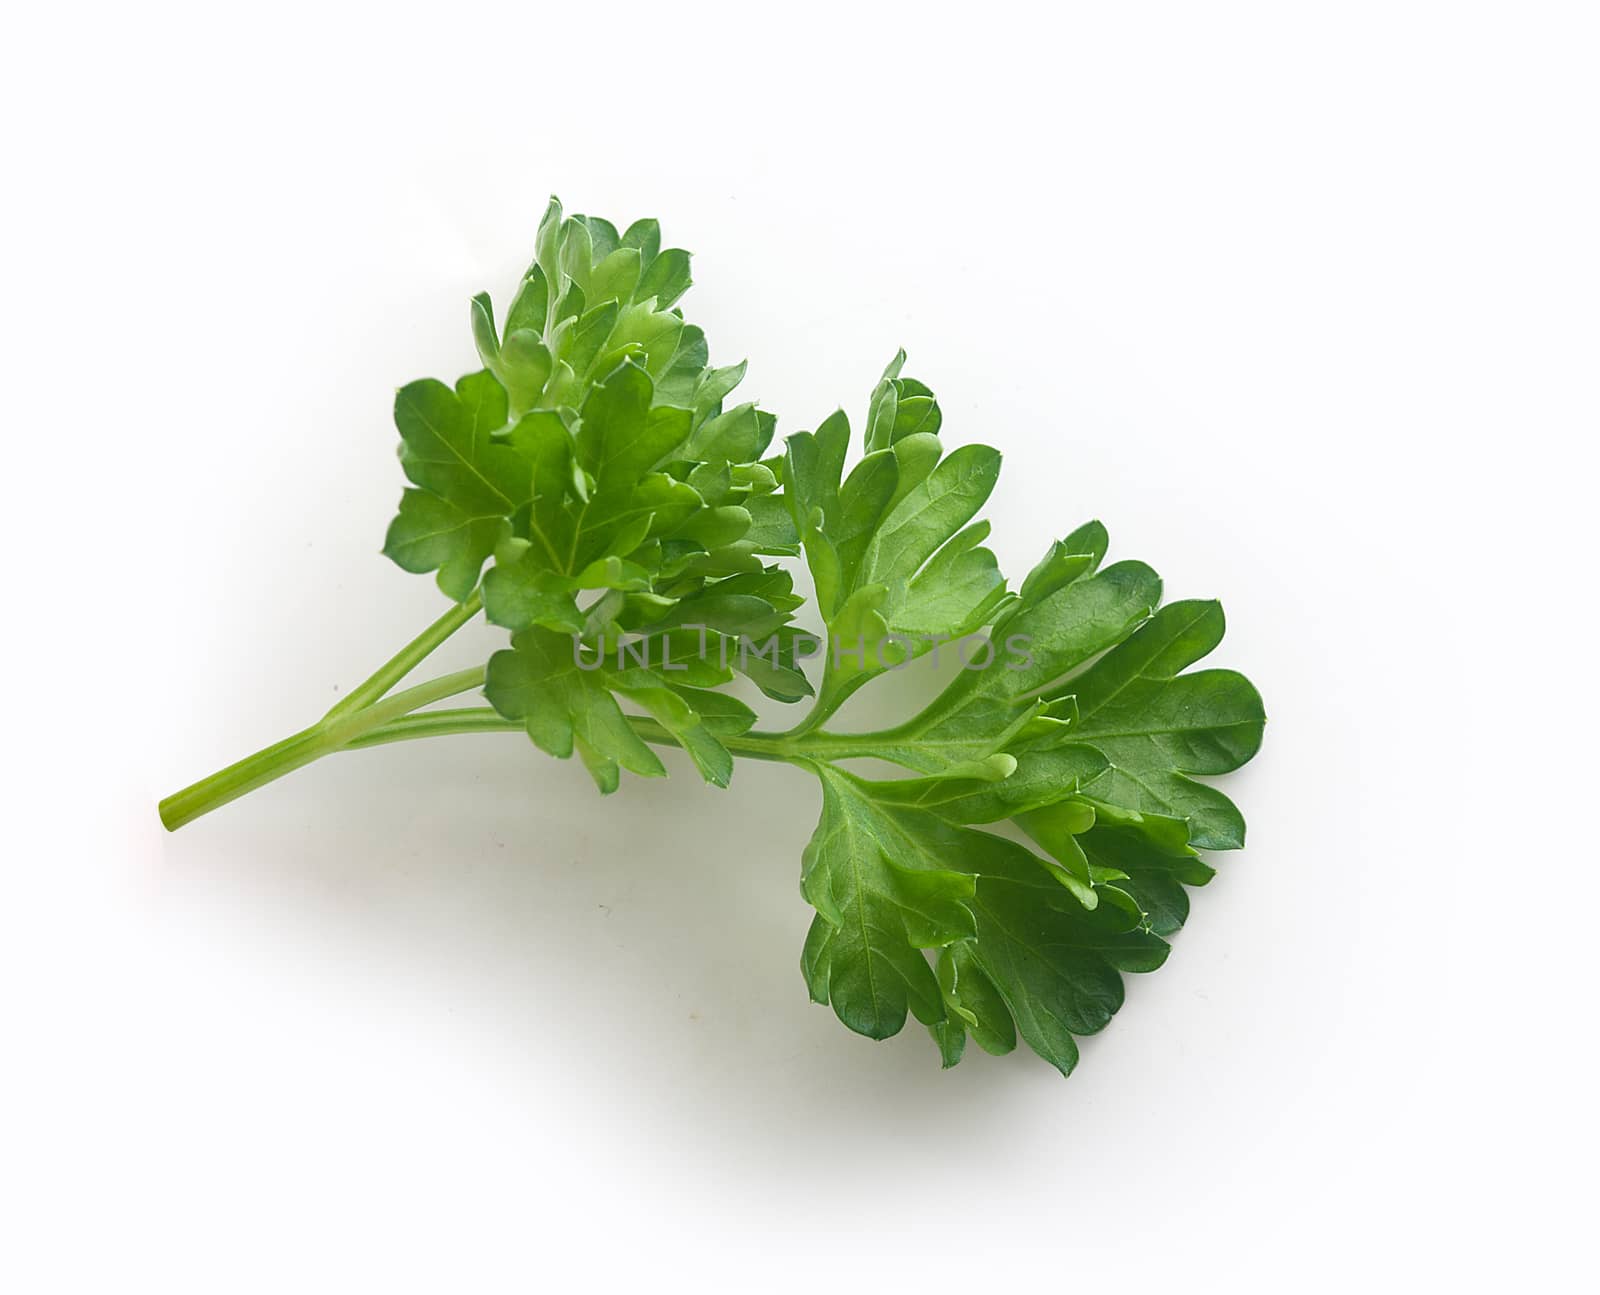 Isolated green branch of parsley on the white background